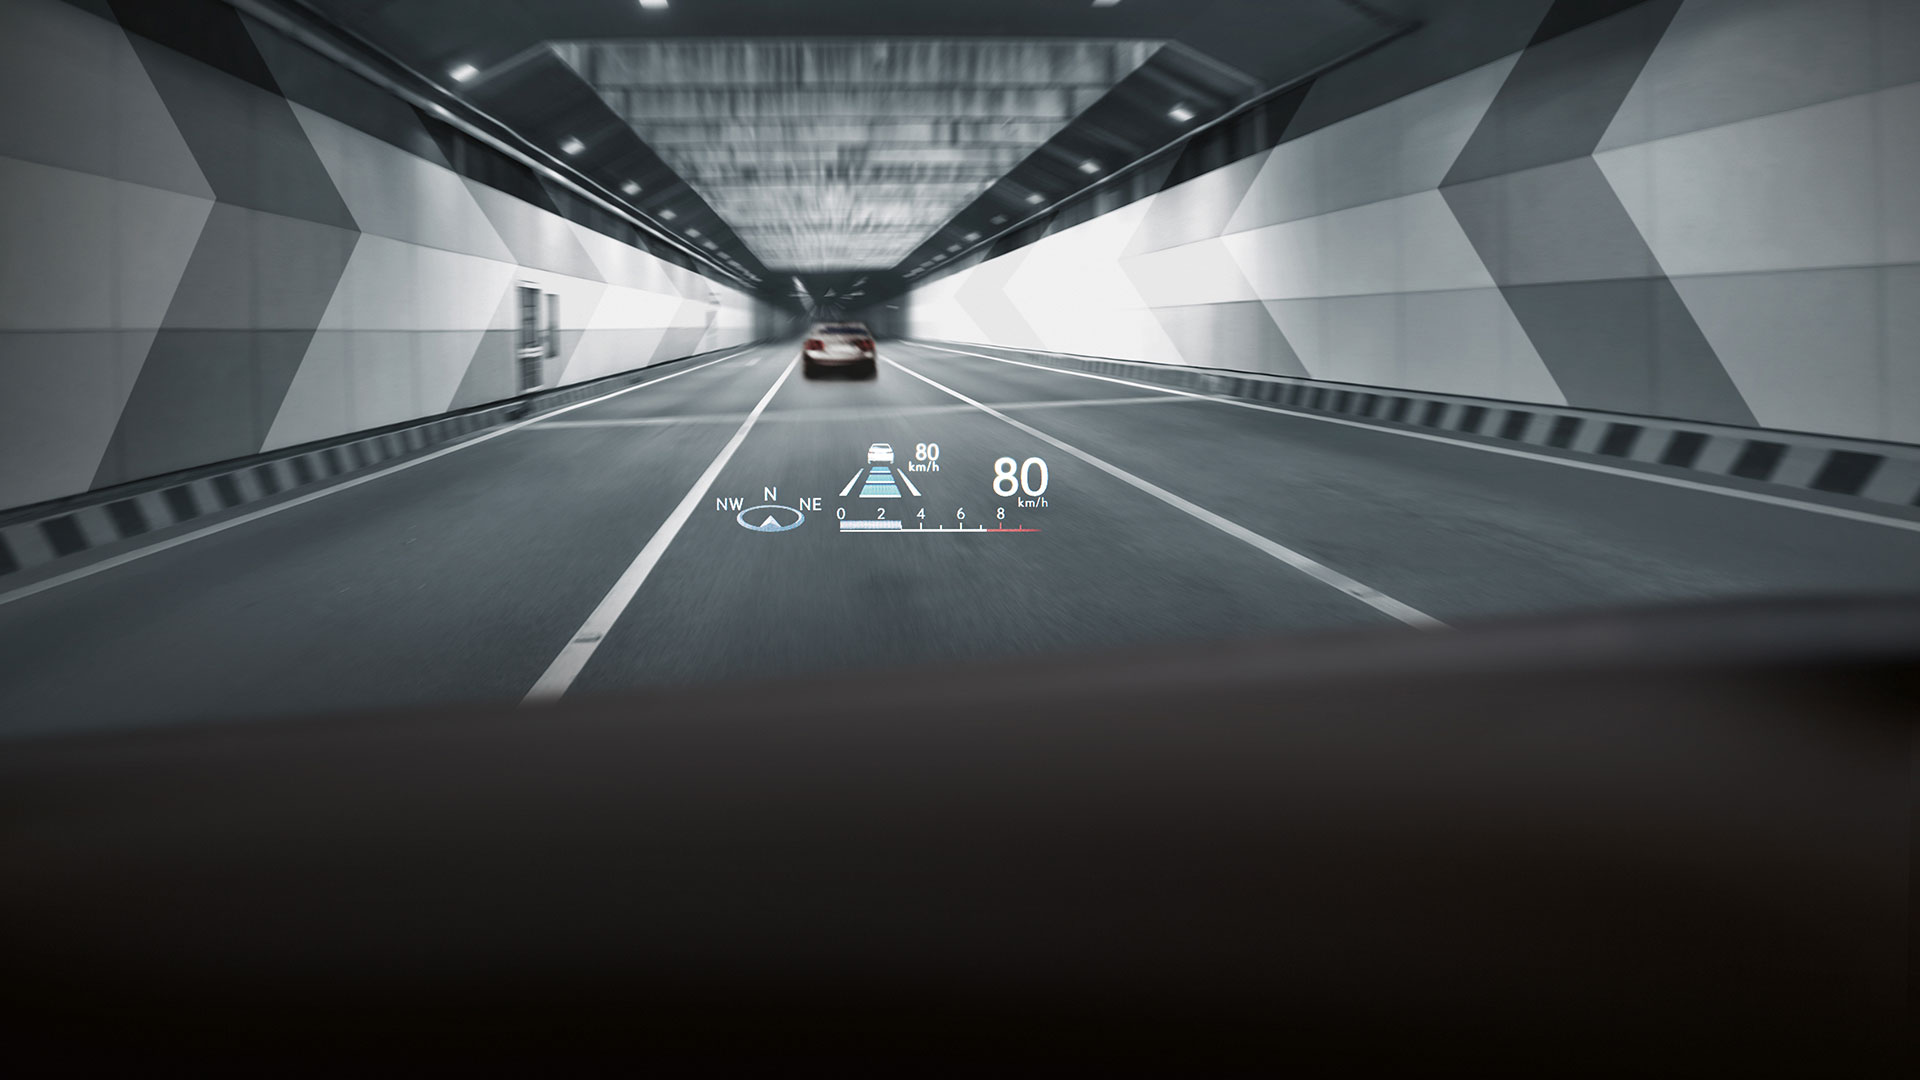 2017-lexus-lc-500-features-extra-wide-head-up-display-1920x1080tcm-3154-1028433-3